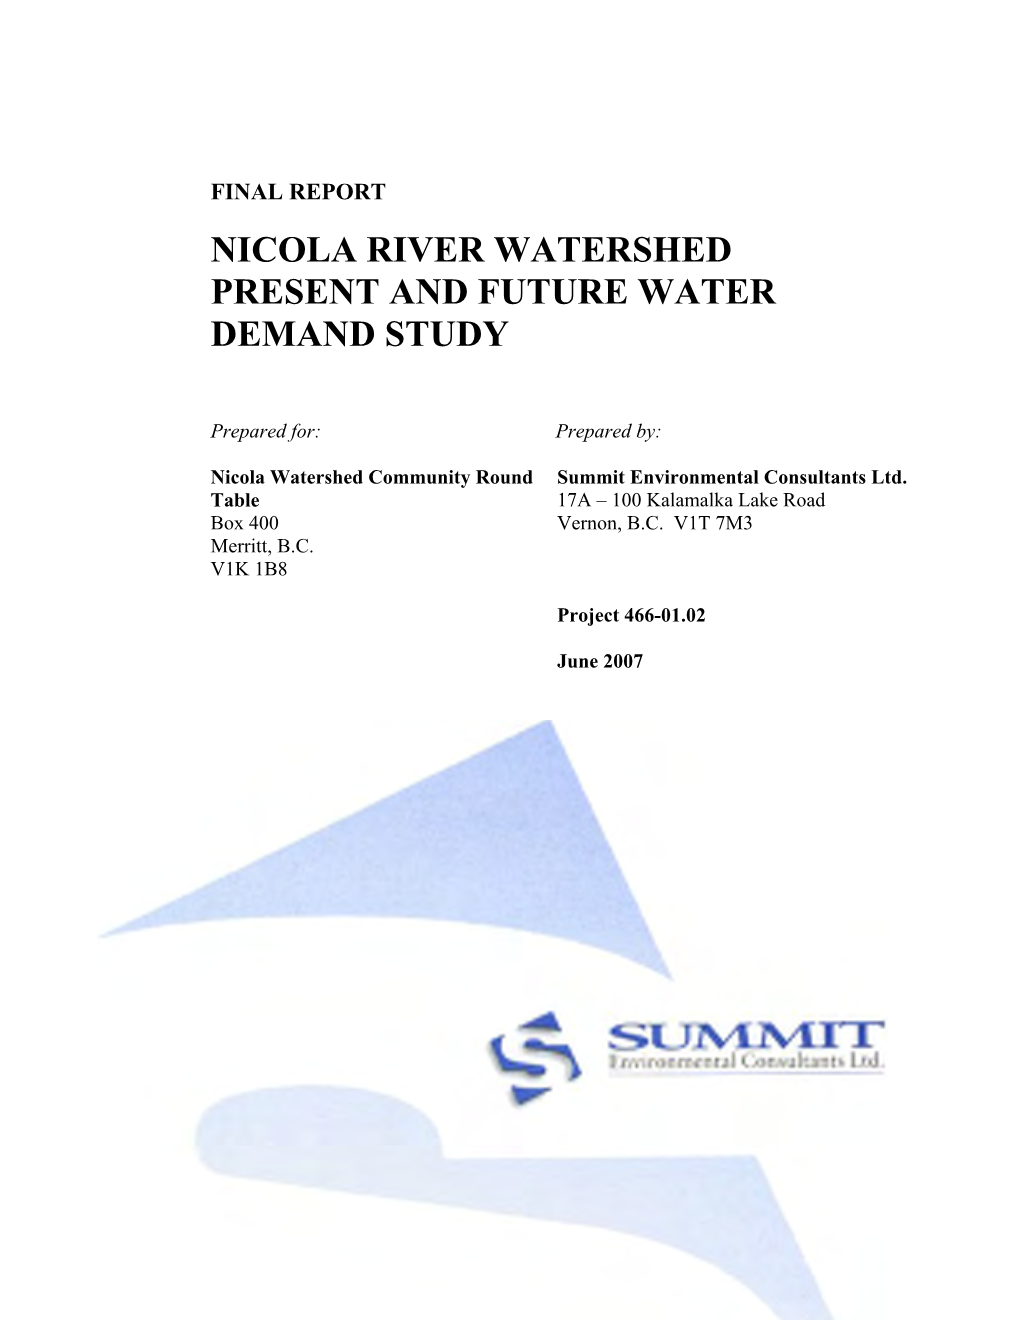 Nicola River Watershed Present and Future Water Demand Study